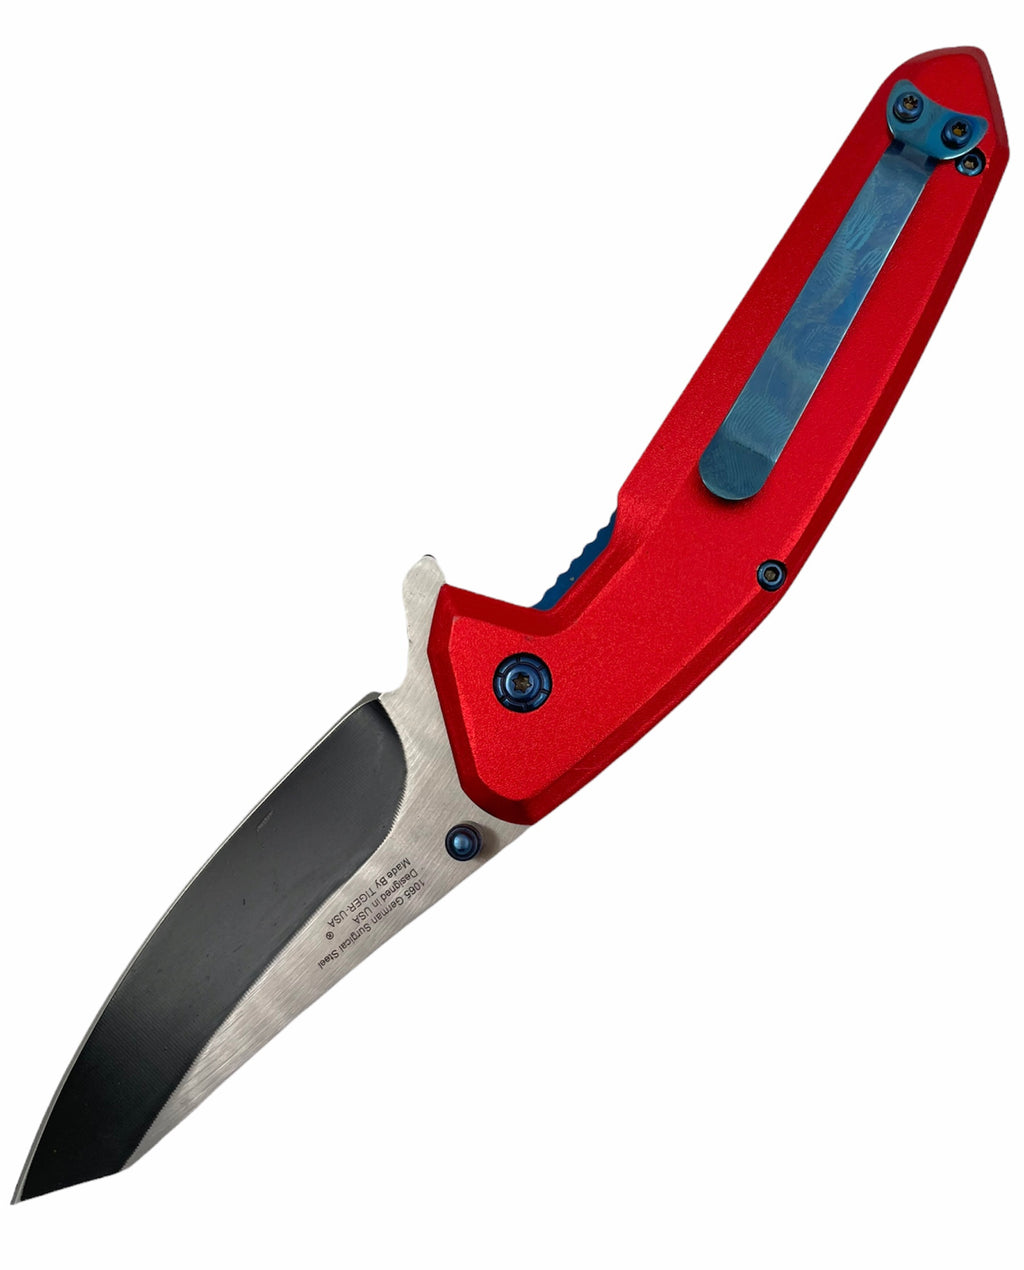 Tiger USA Spring Action Red Folding knife tanto